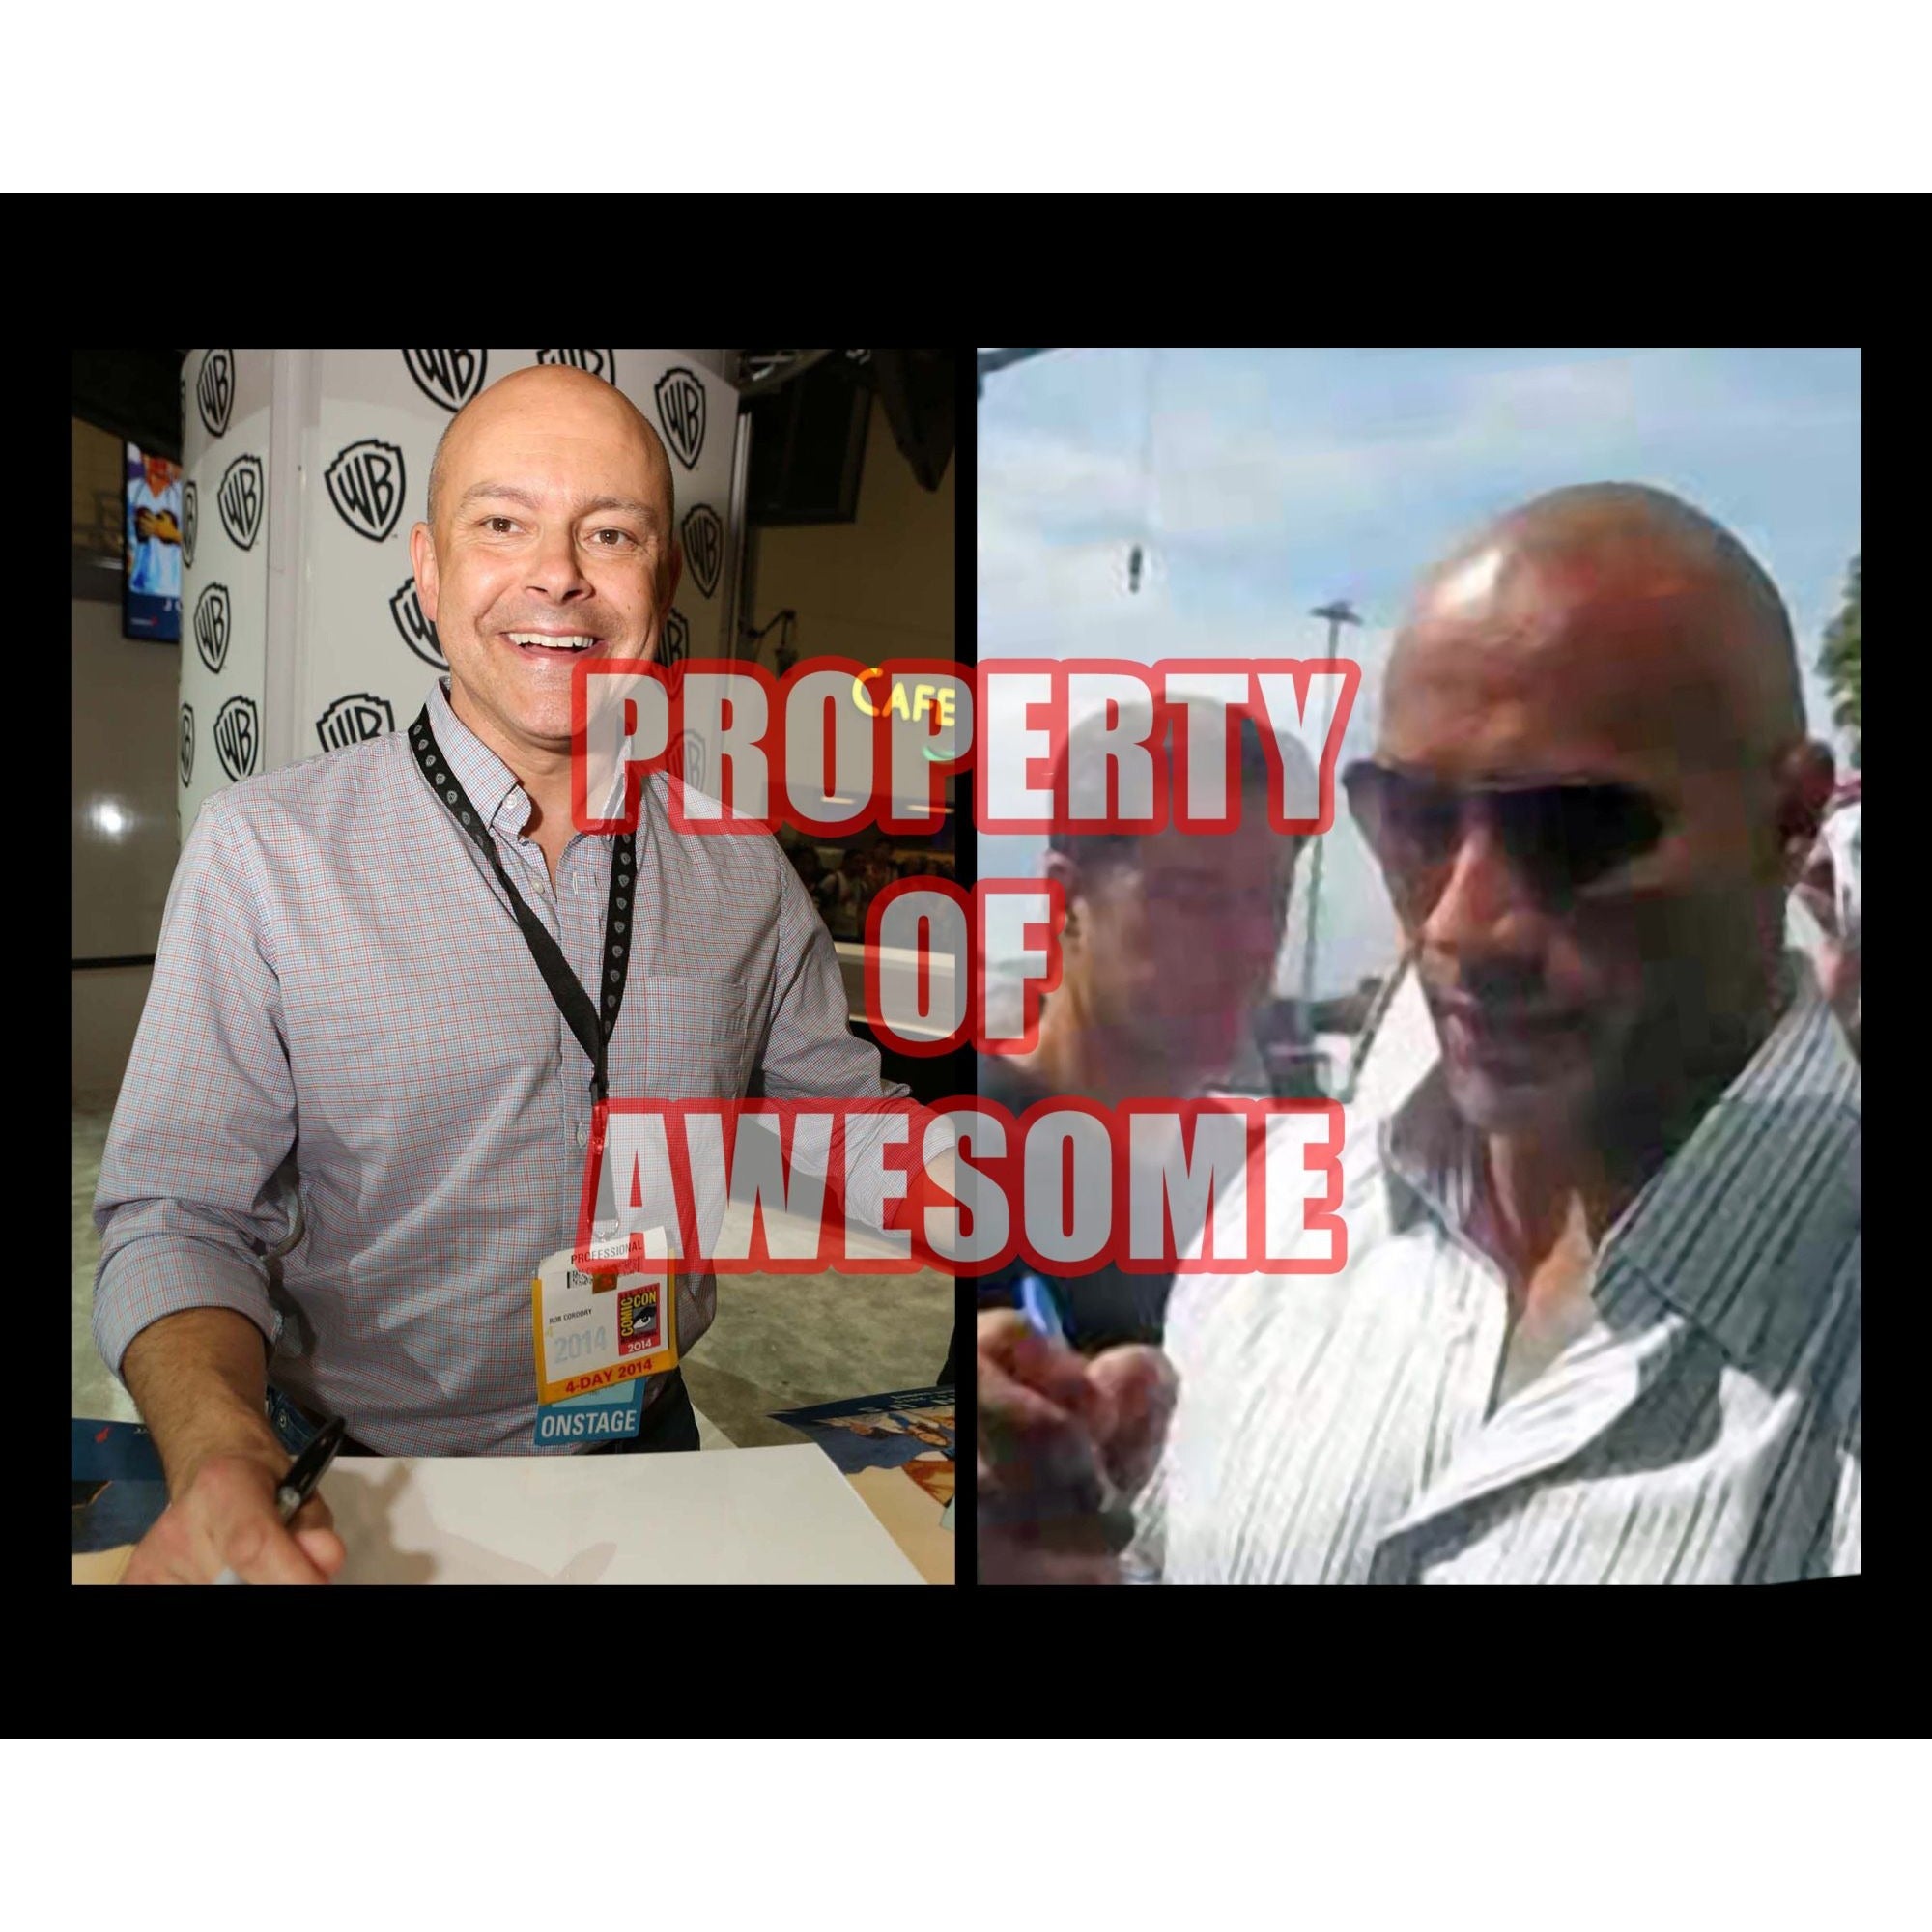 Dwayne Johnson, Rob Corddry 'Ballers' 8 x 10 signed with proof